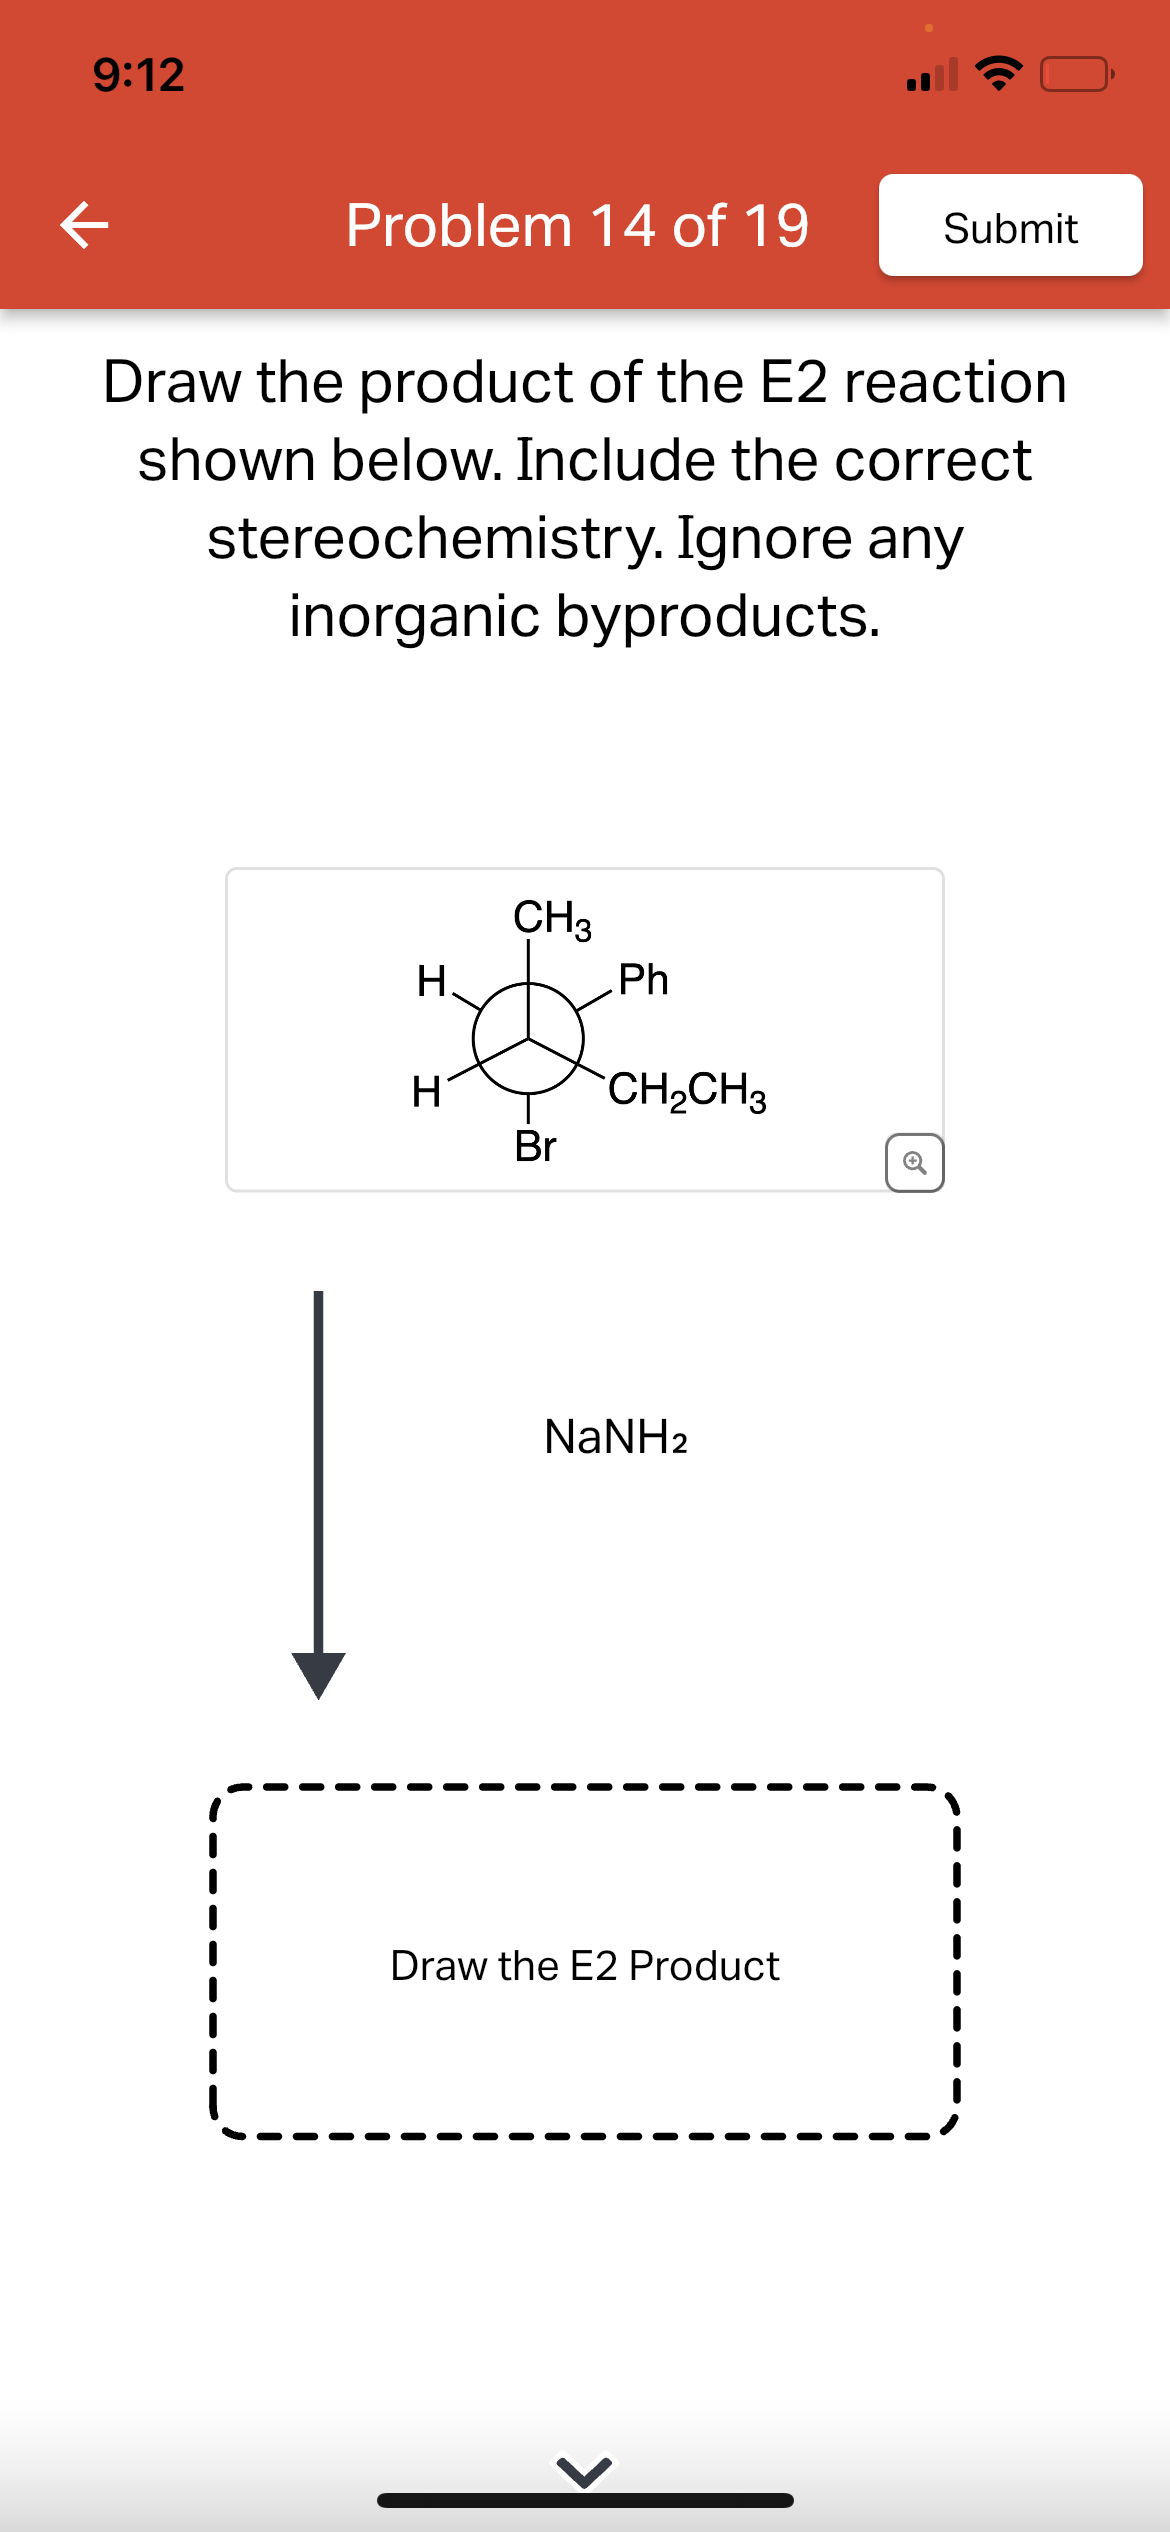 9:12
K
Problem 14 of 19
Draw the product of the E2 reaction
shown below. Include the correct
stereochemistry. Ignore any
inorganic byproducts.
H.
H
CH3
Br
Ph
CH₂CH3
Submit
NaNH2
Draw the E2 Product